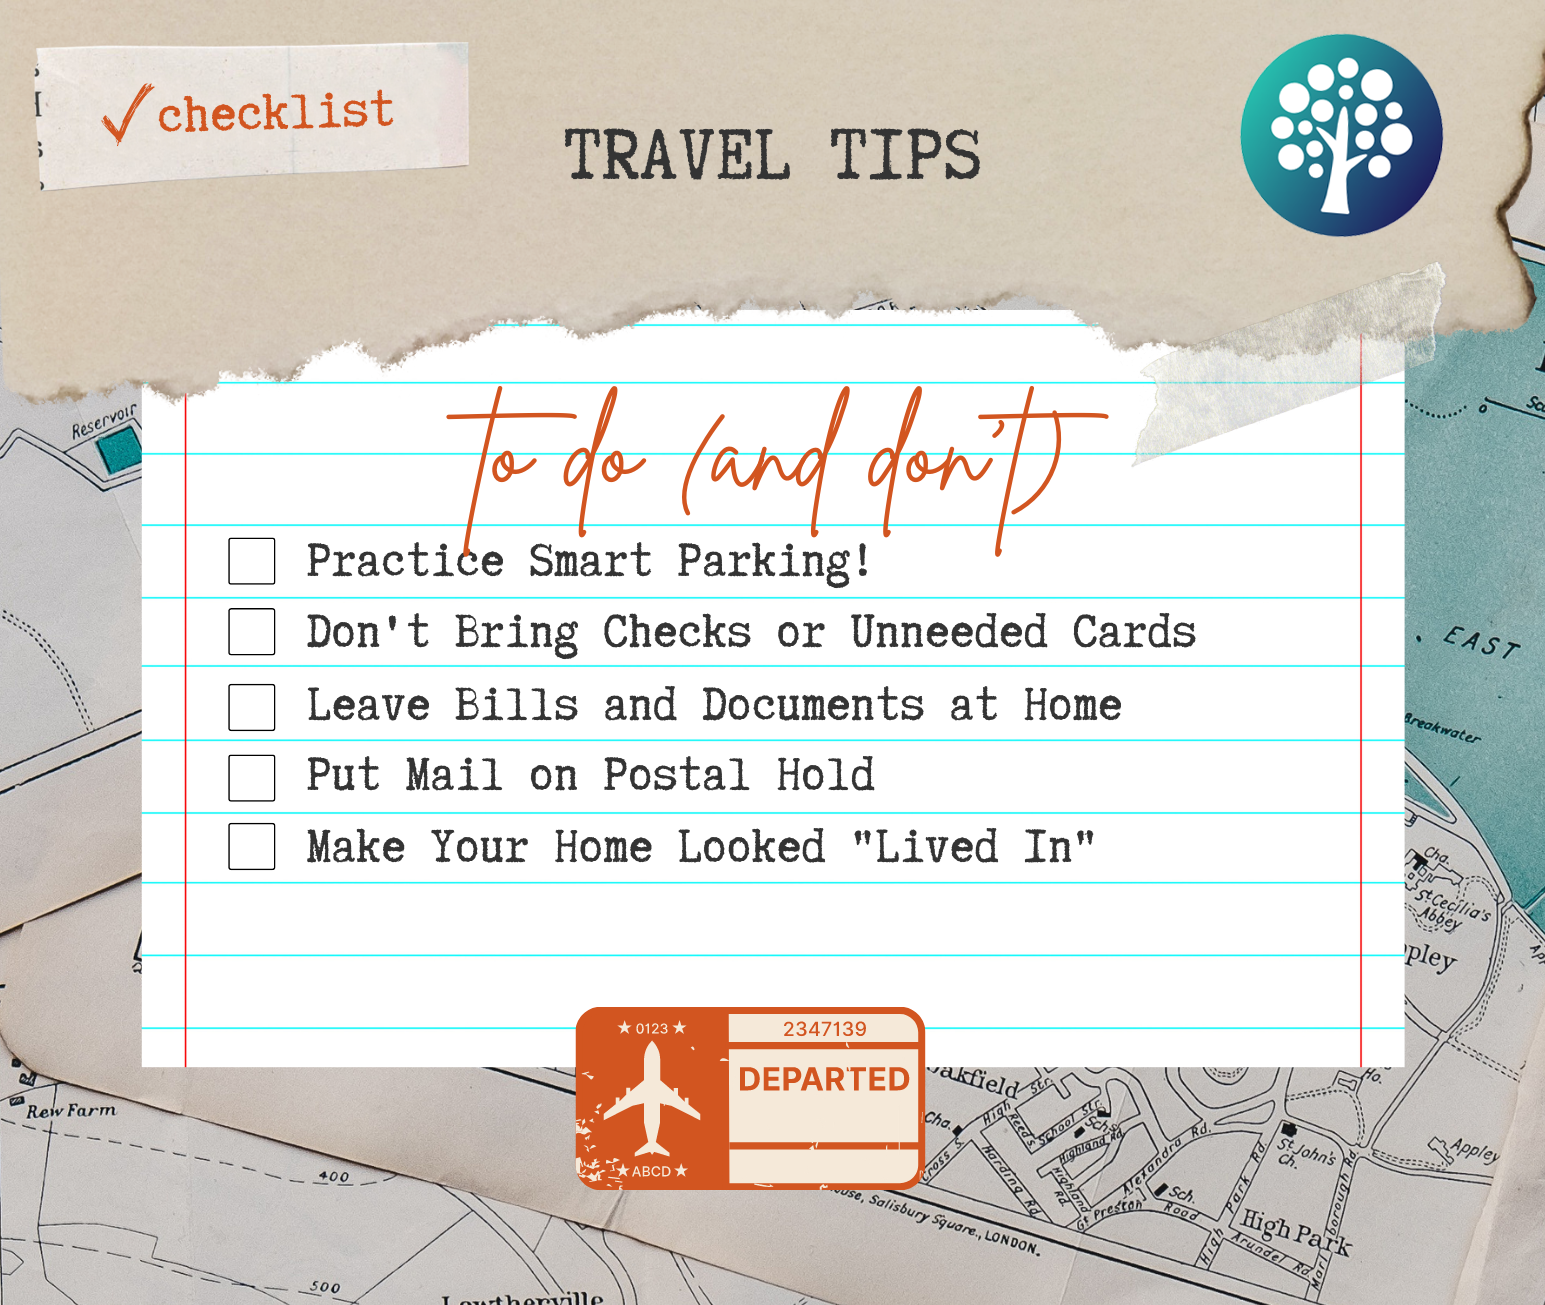 Checklist to follow when leaving on vacation, so that you don't fall victim to fraud.